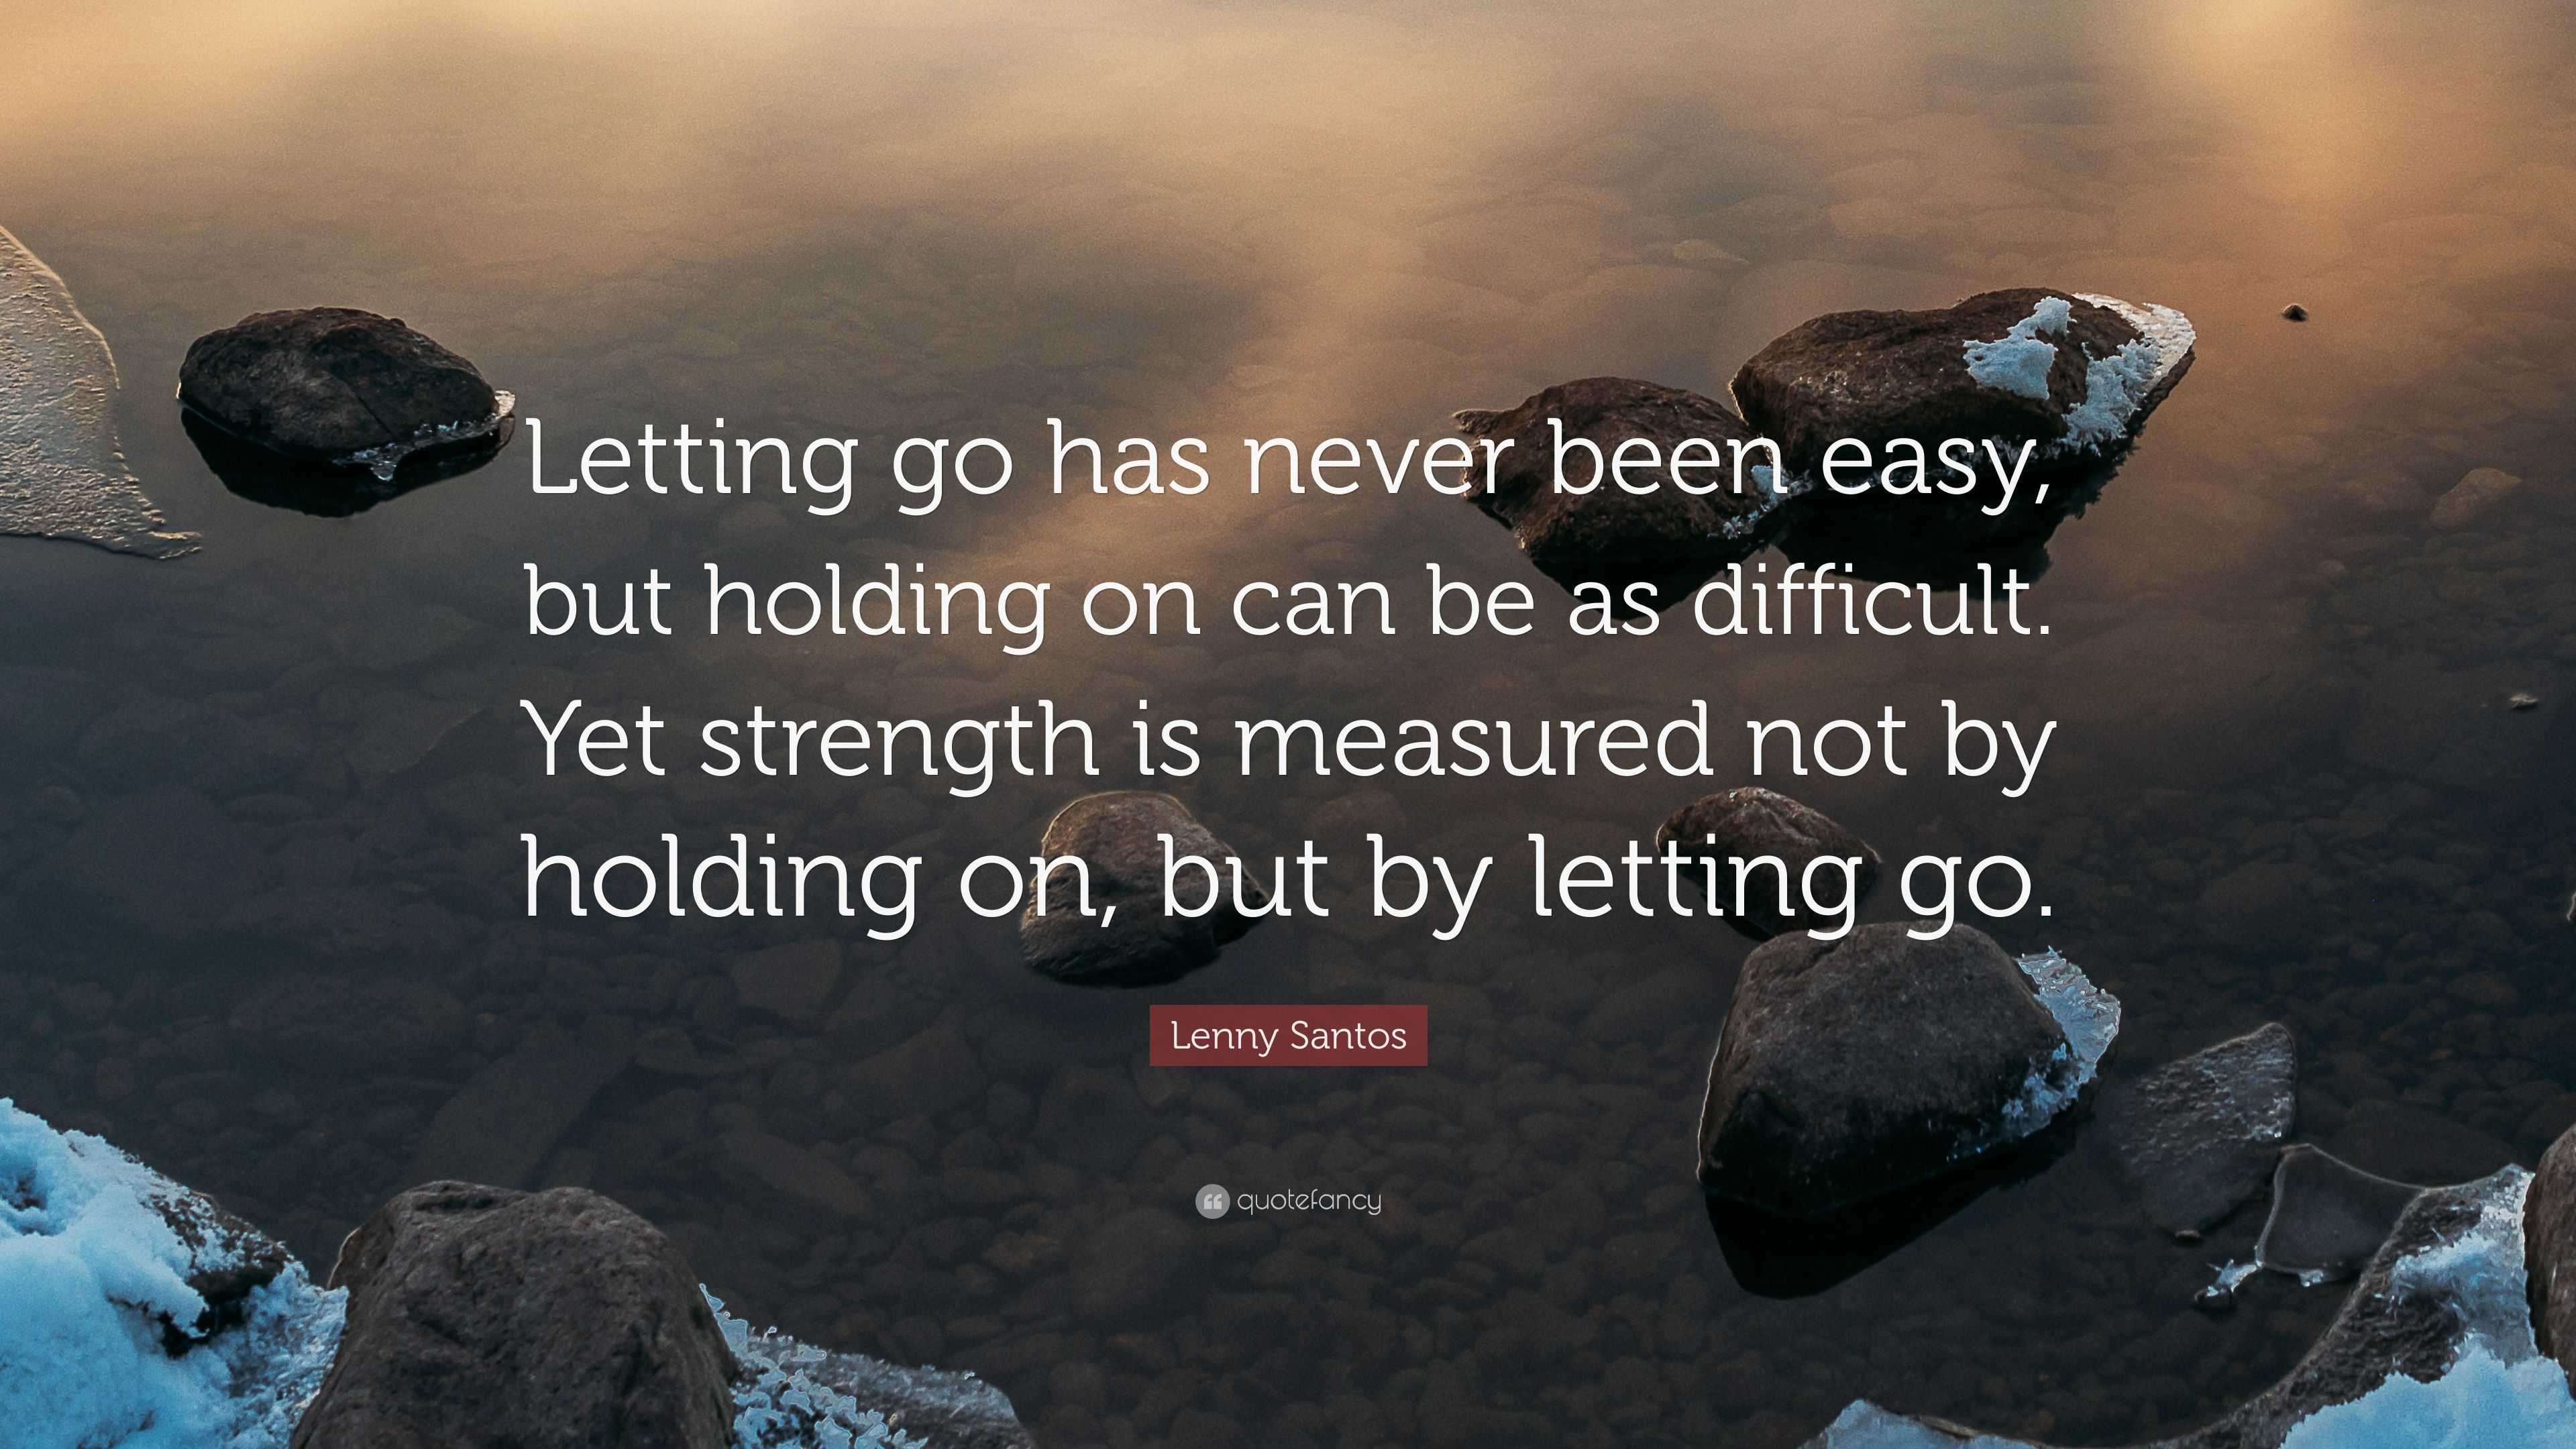 Lenny Santos Quote: “Letting go has never been easy, but holding on can ...